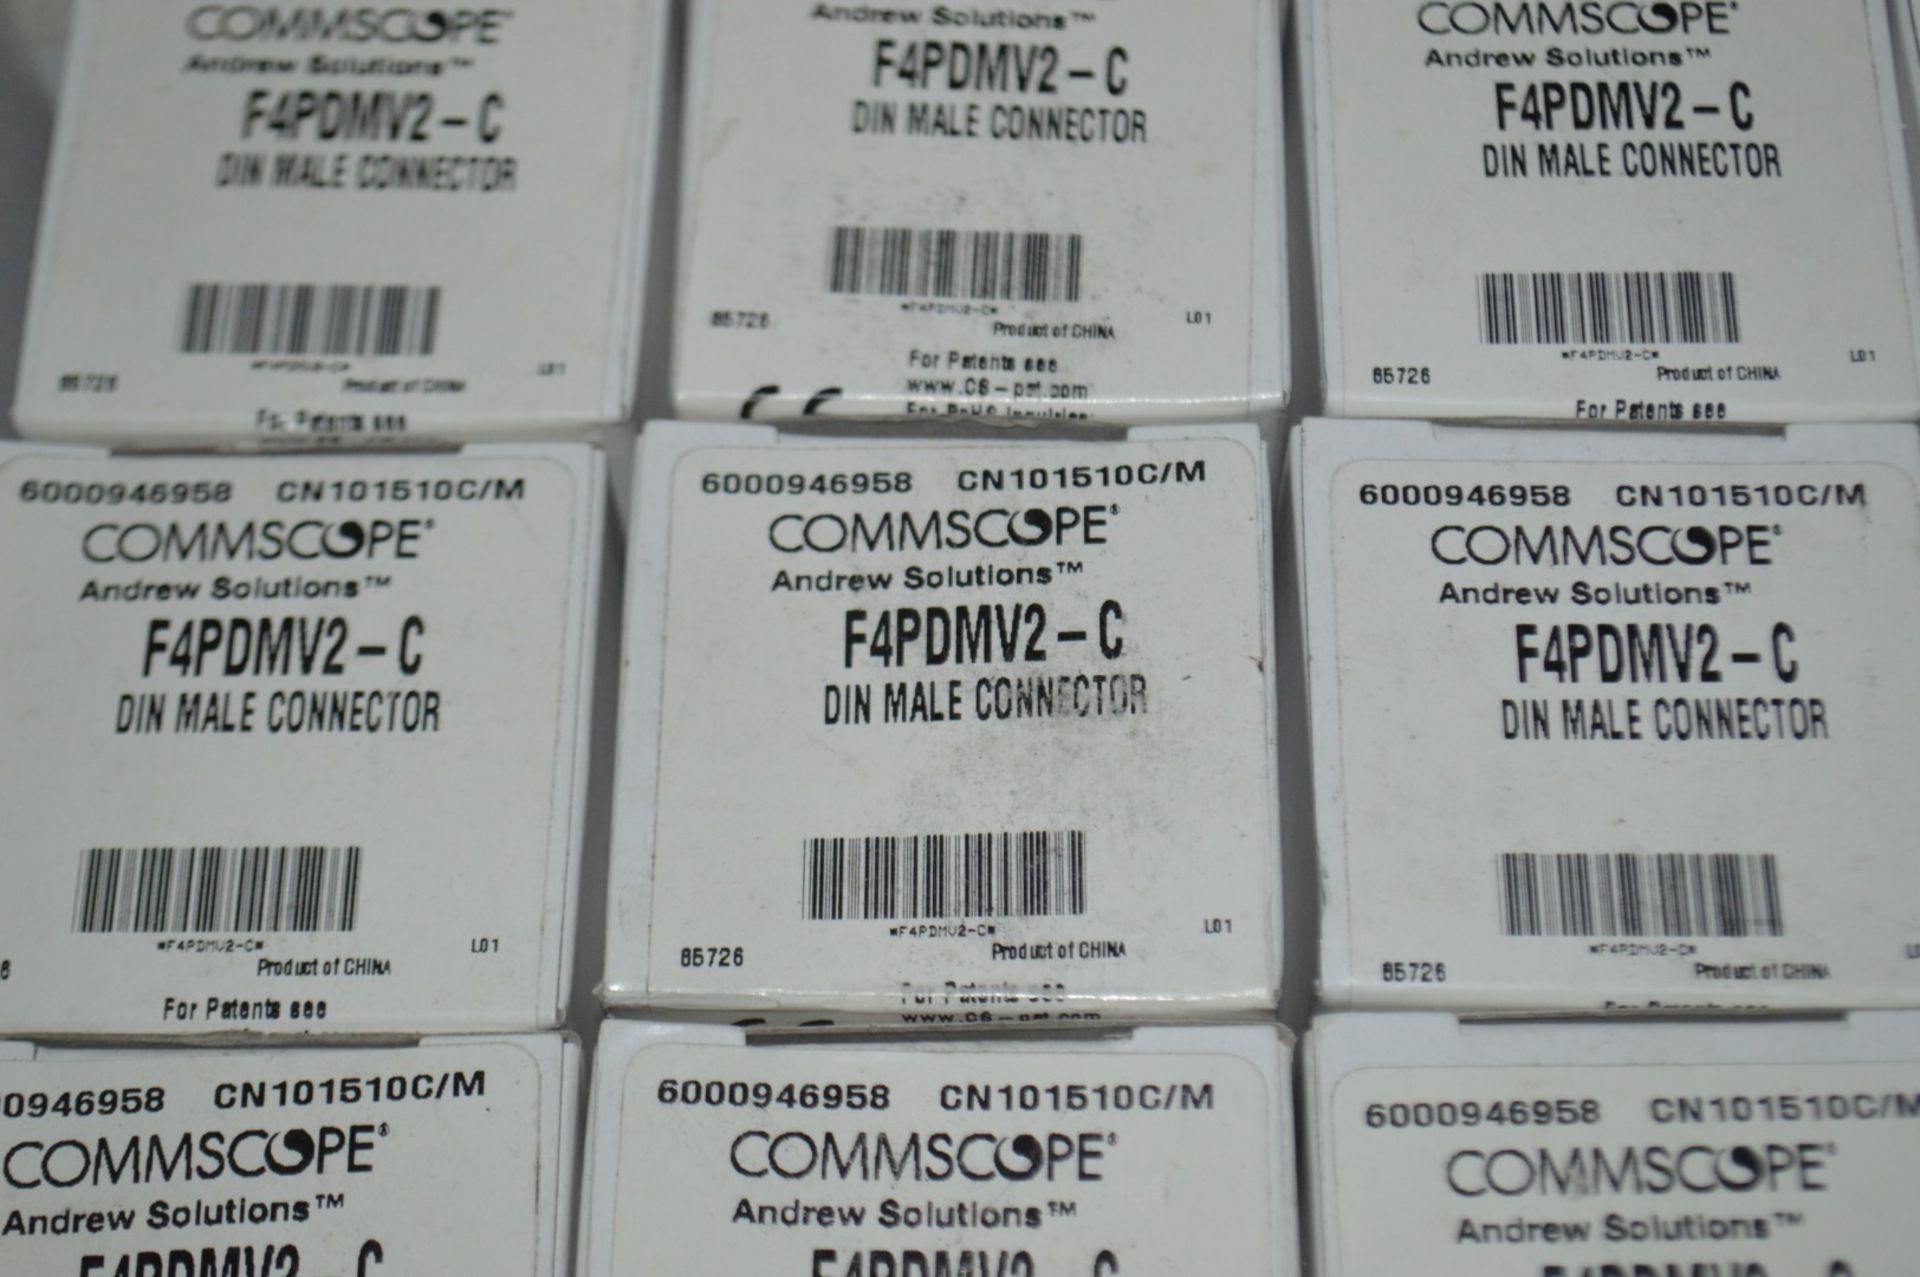 50 x Commscope F4PDMV2-C Din Male Connectors - Andrew Solutions - Brand New and Boxed - CL011 - - Image 4 of 5